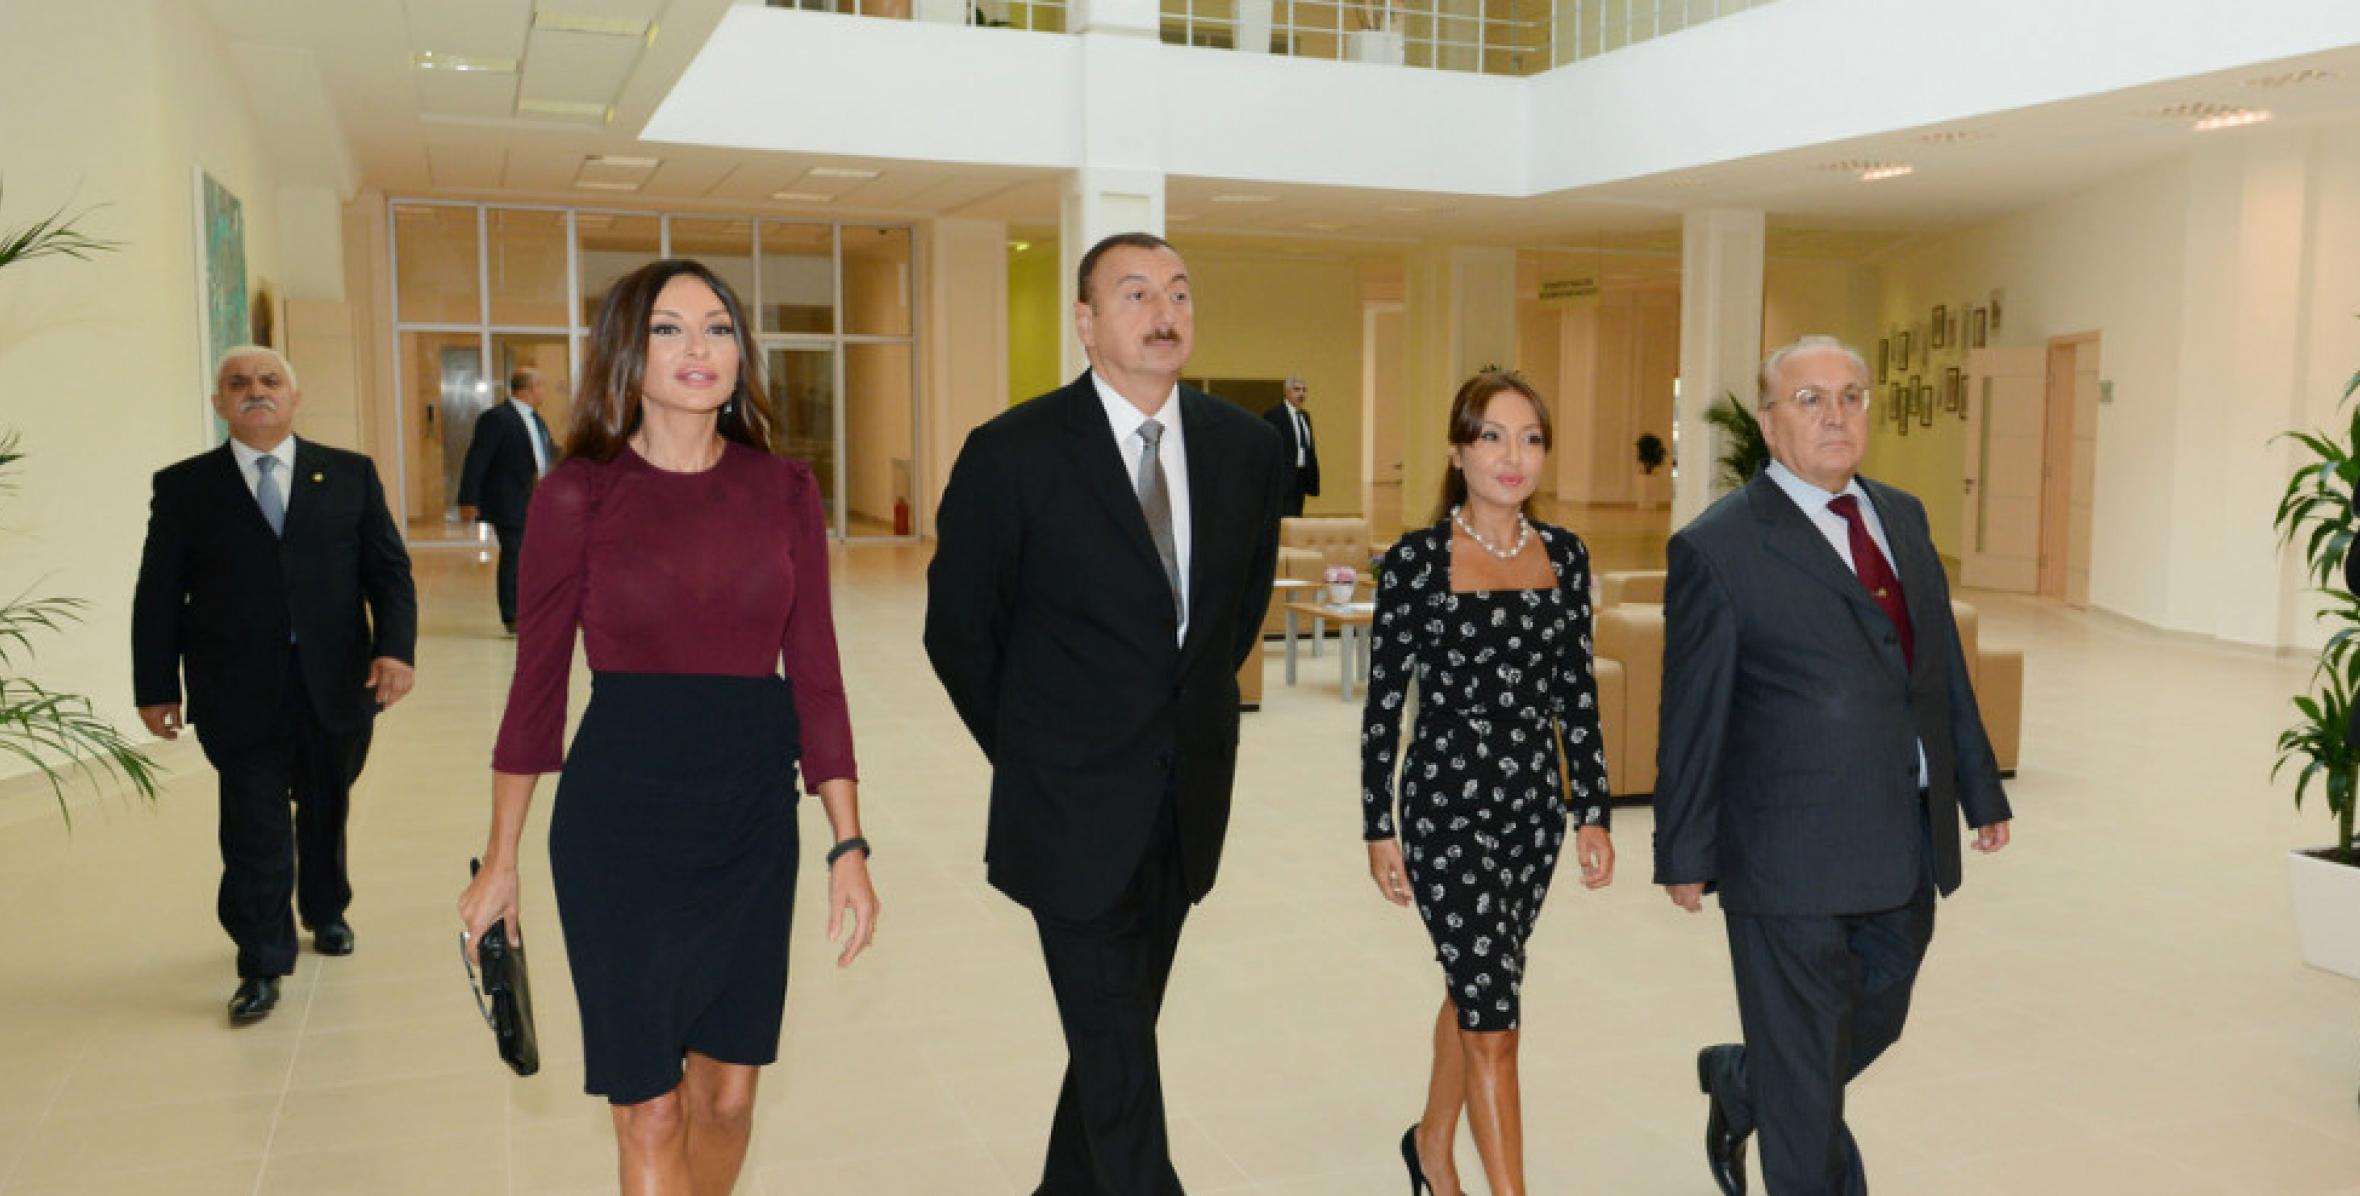 Ilham Aliyev attended the opening of the new education complex for the Baku branch of Moscow State University named after M.V. Lomonosov